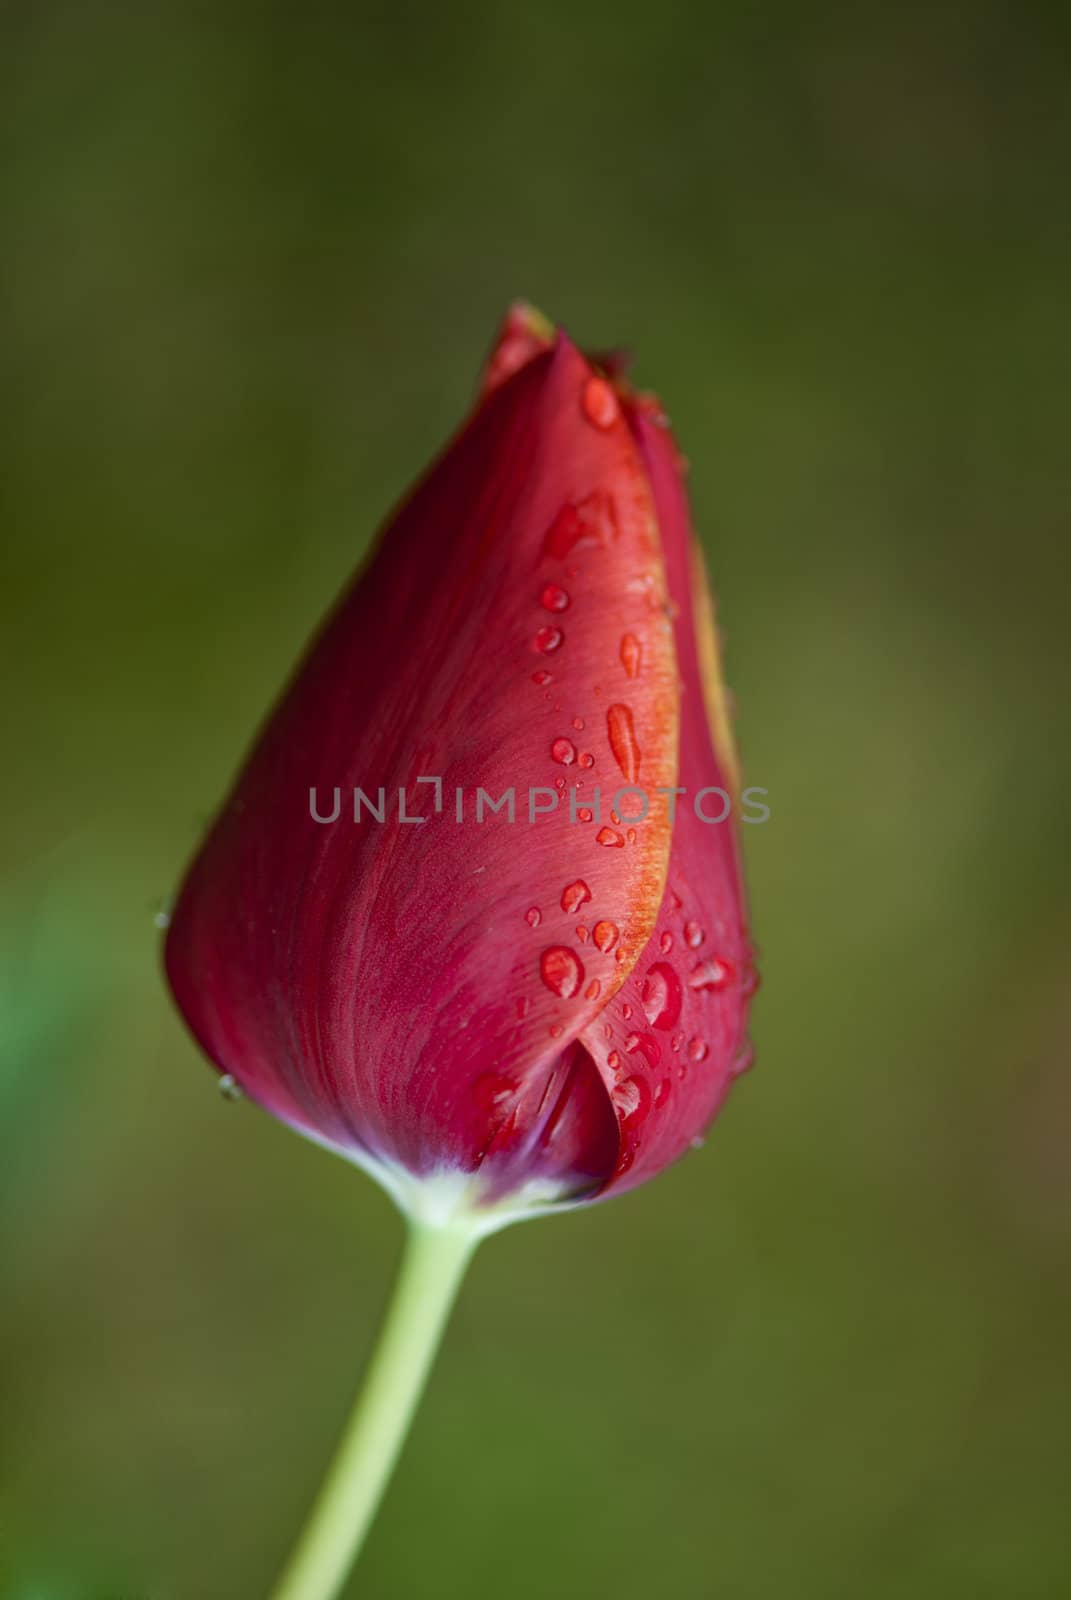 Closed Red Tulip on a Tuscan Garden, Italy